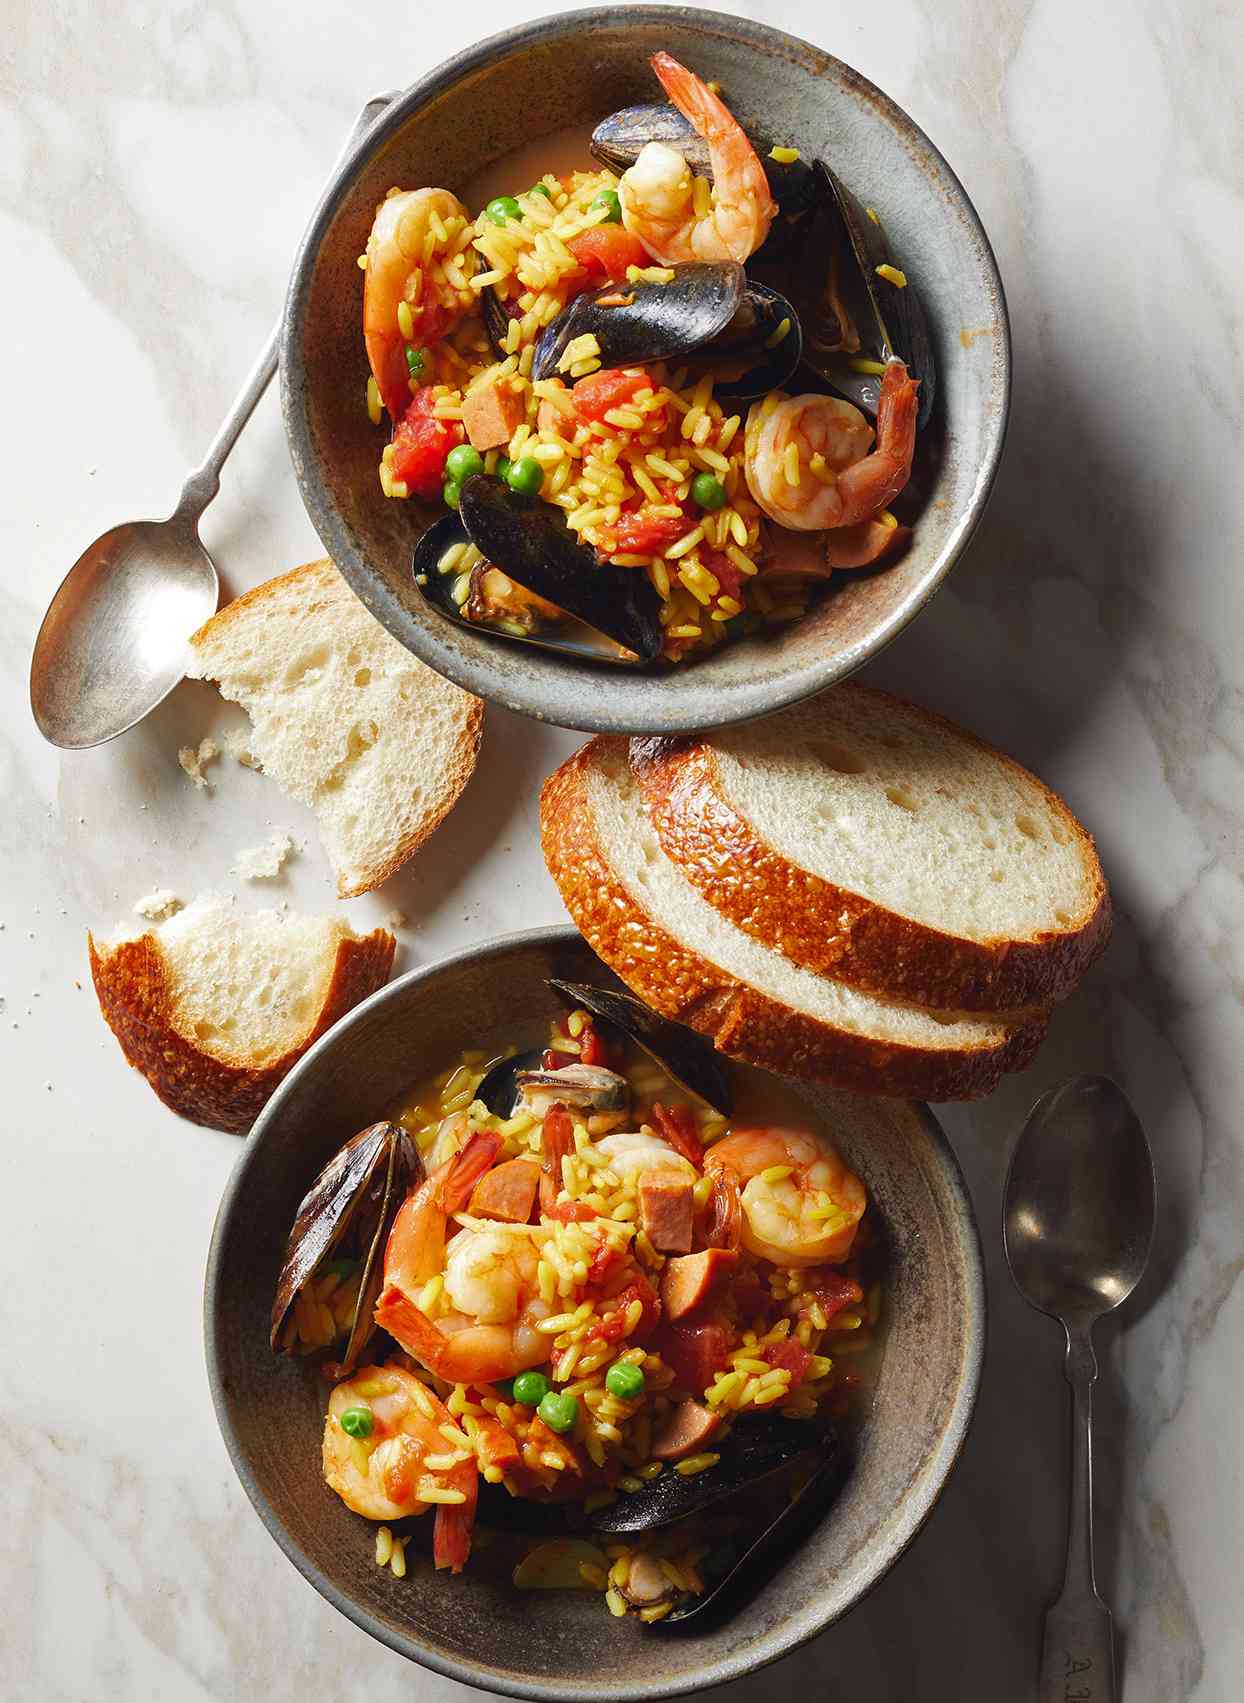 Simplified Paella in bowls